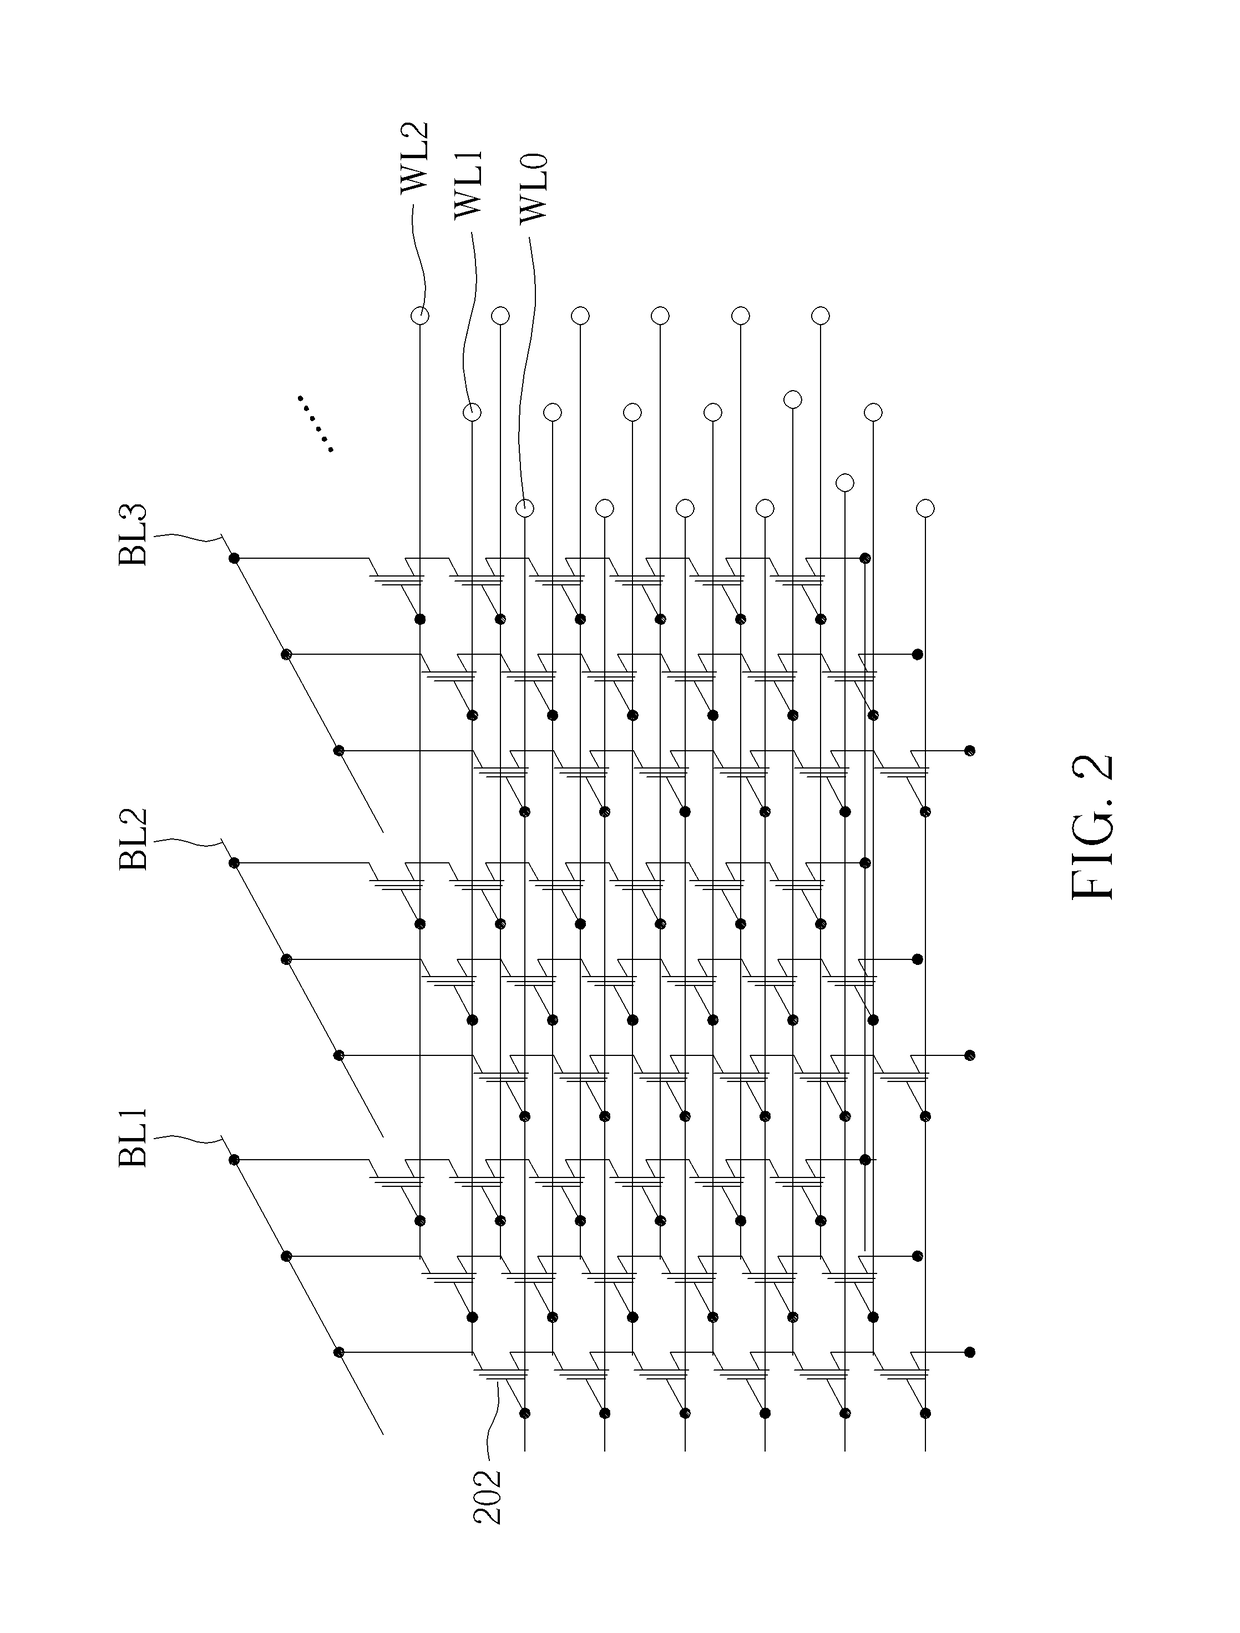 Flash memory controller and memory device for accessing flash memory module, and associated method